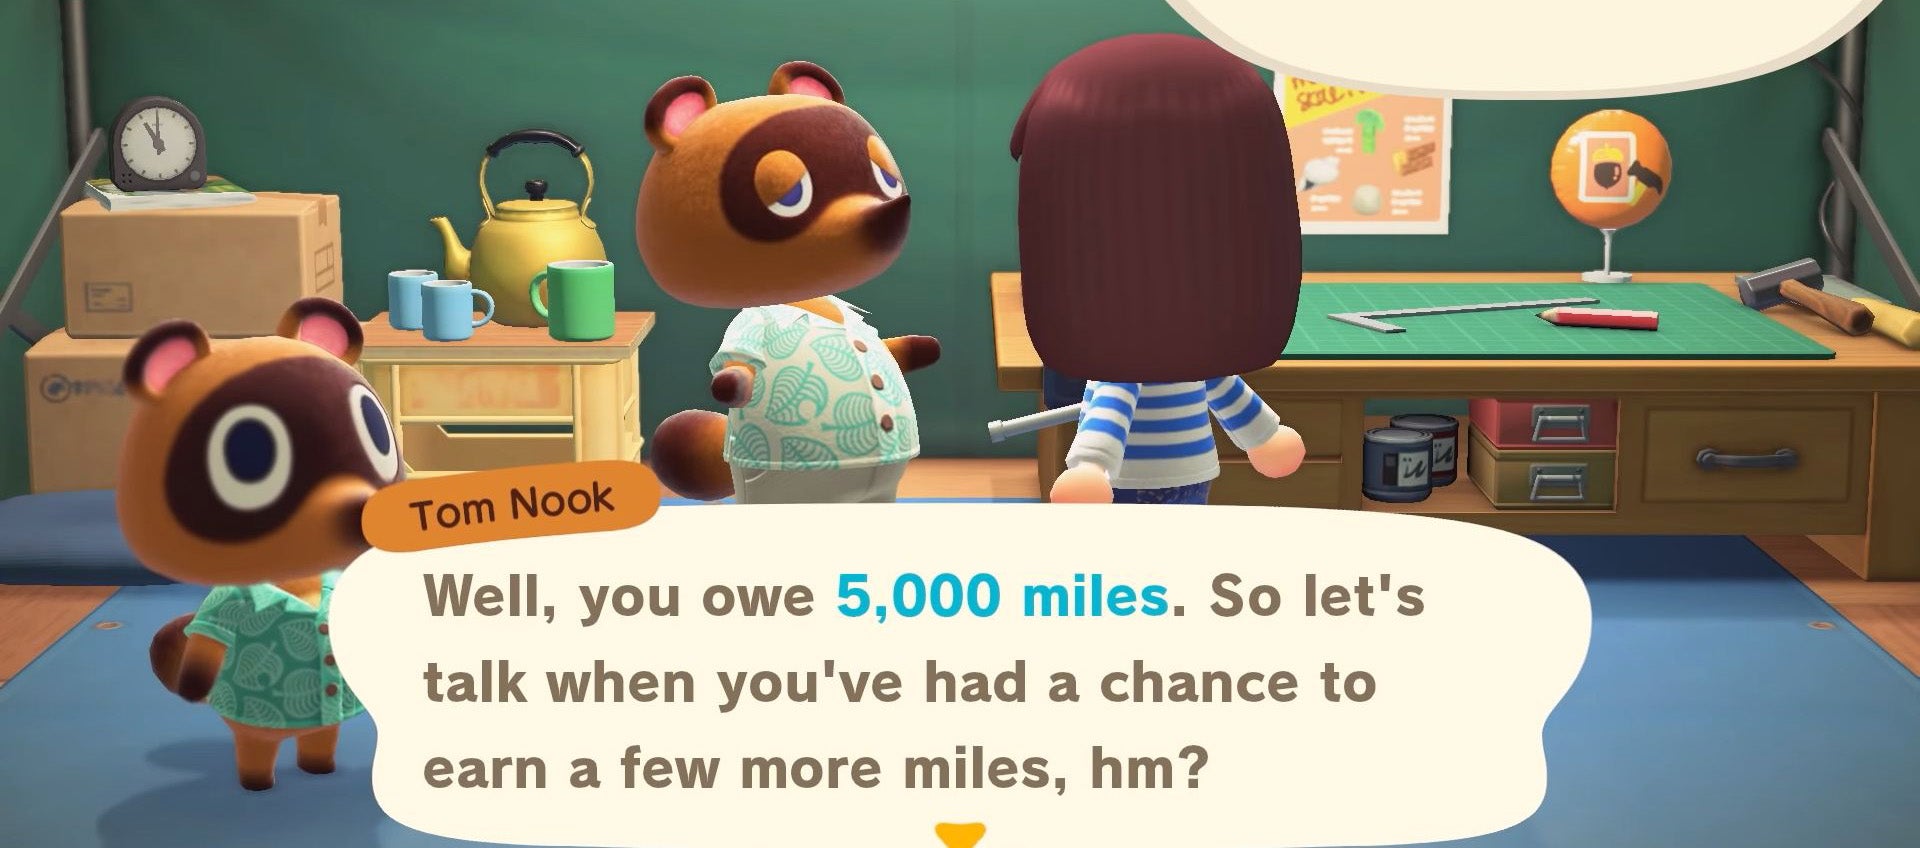 Animal Crossing house upgrades, from getting your first house and loan to  expansions, in New Horizons explained 